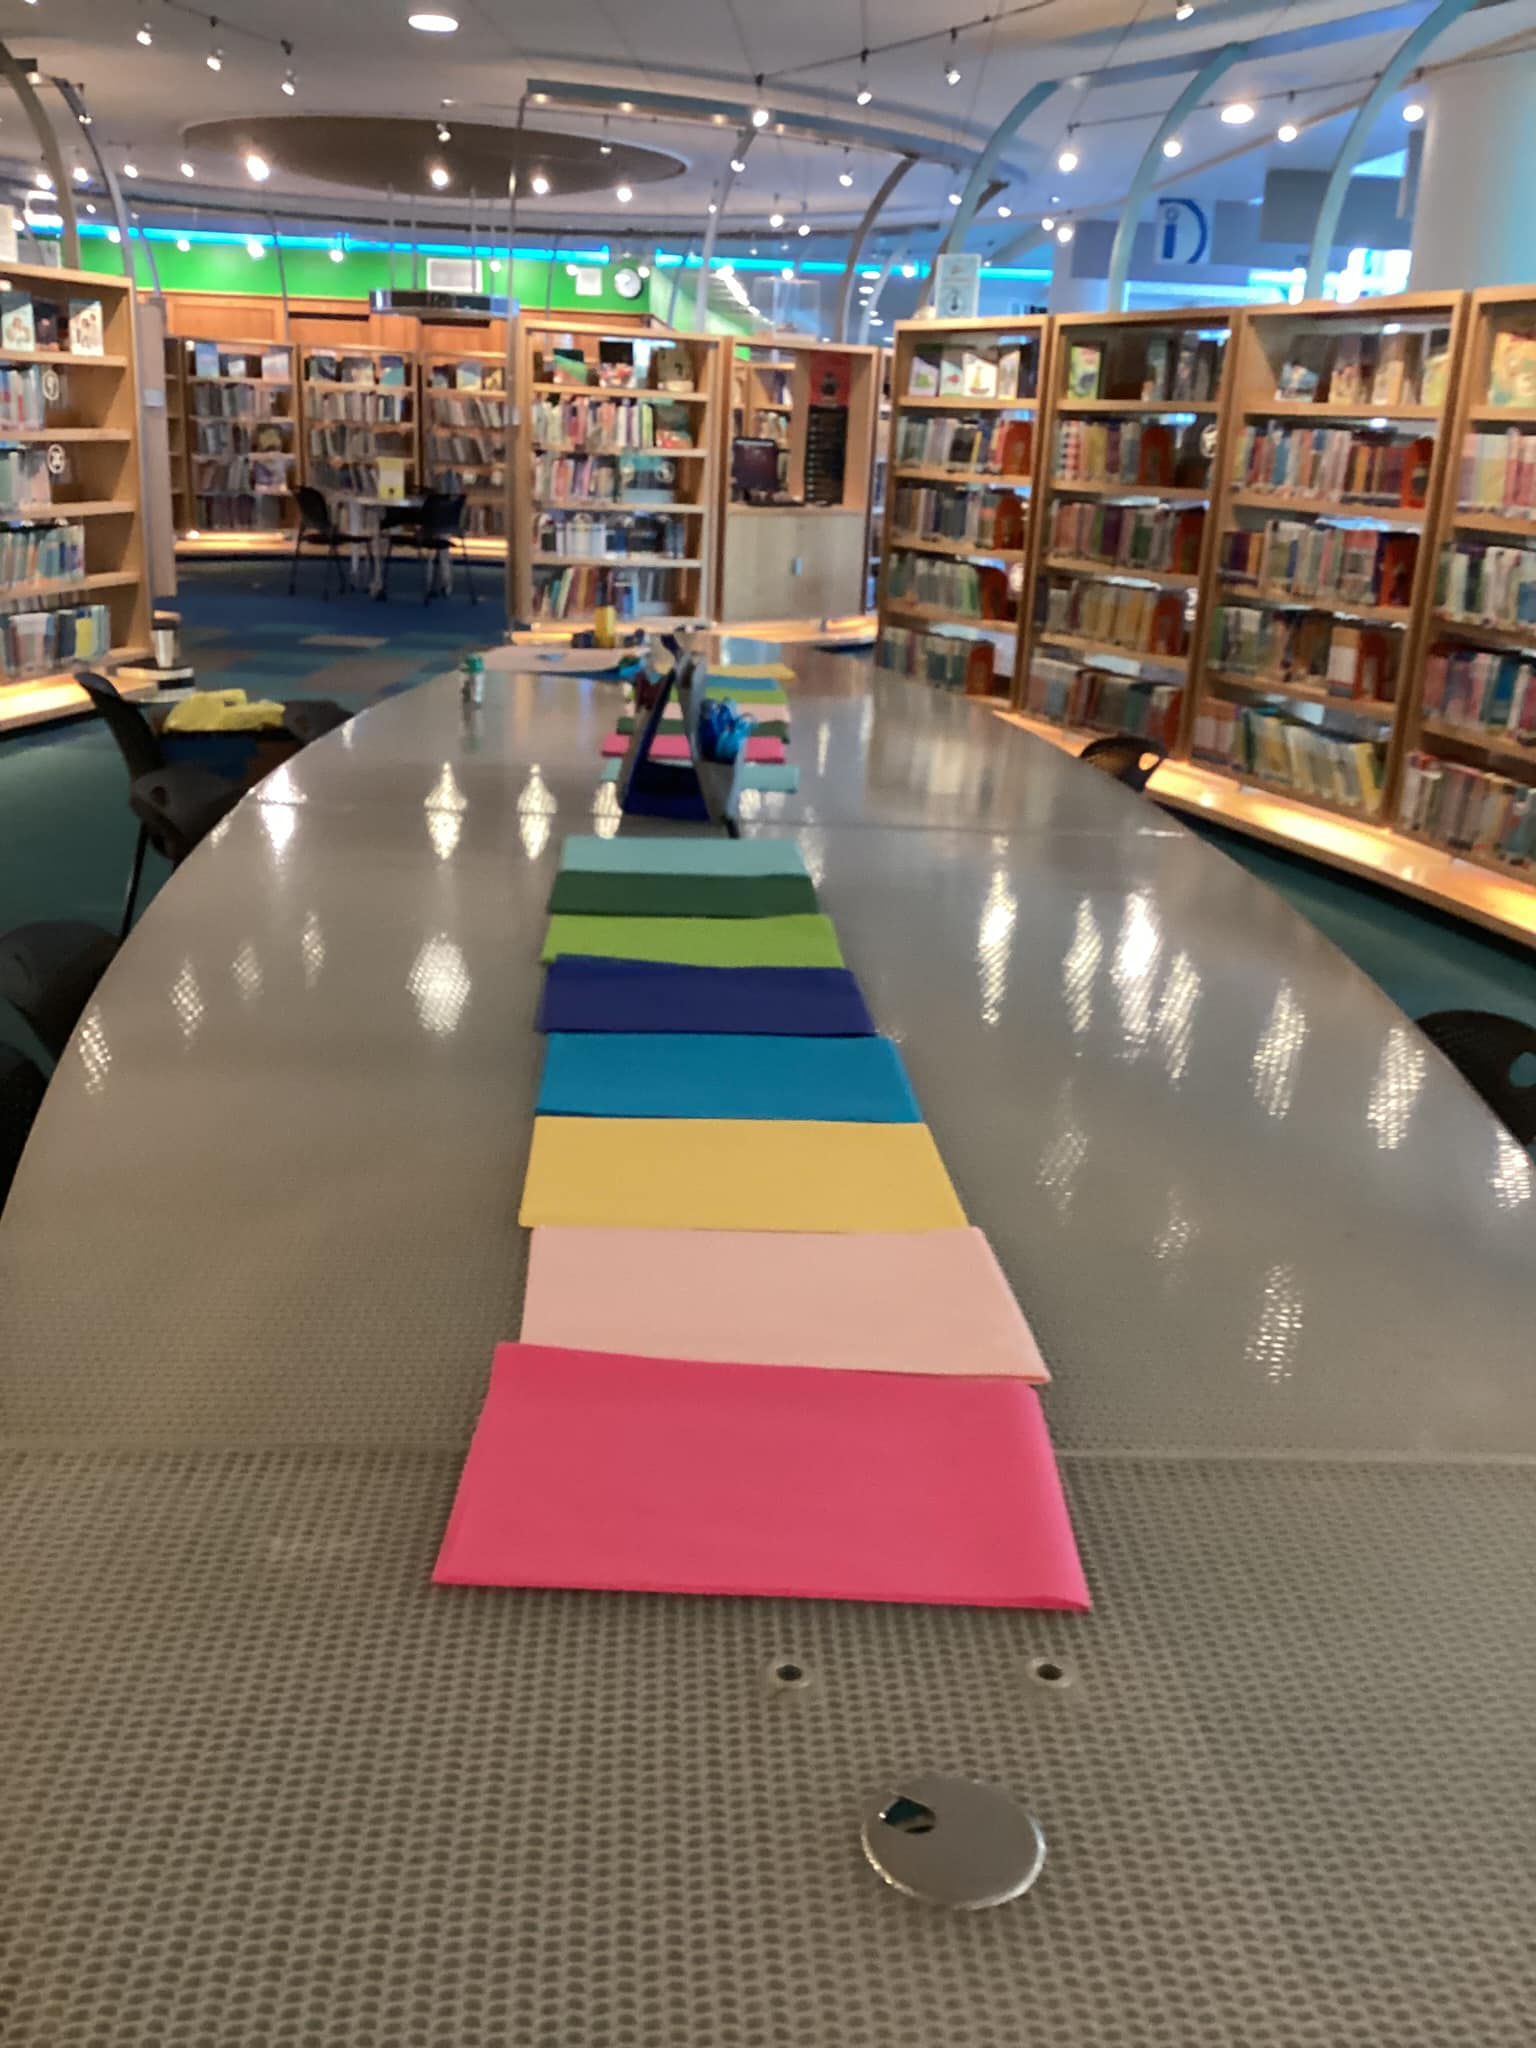 Table surrounded by shelves of books with squares of colored material spread out